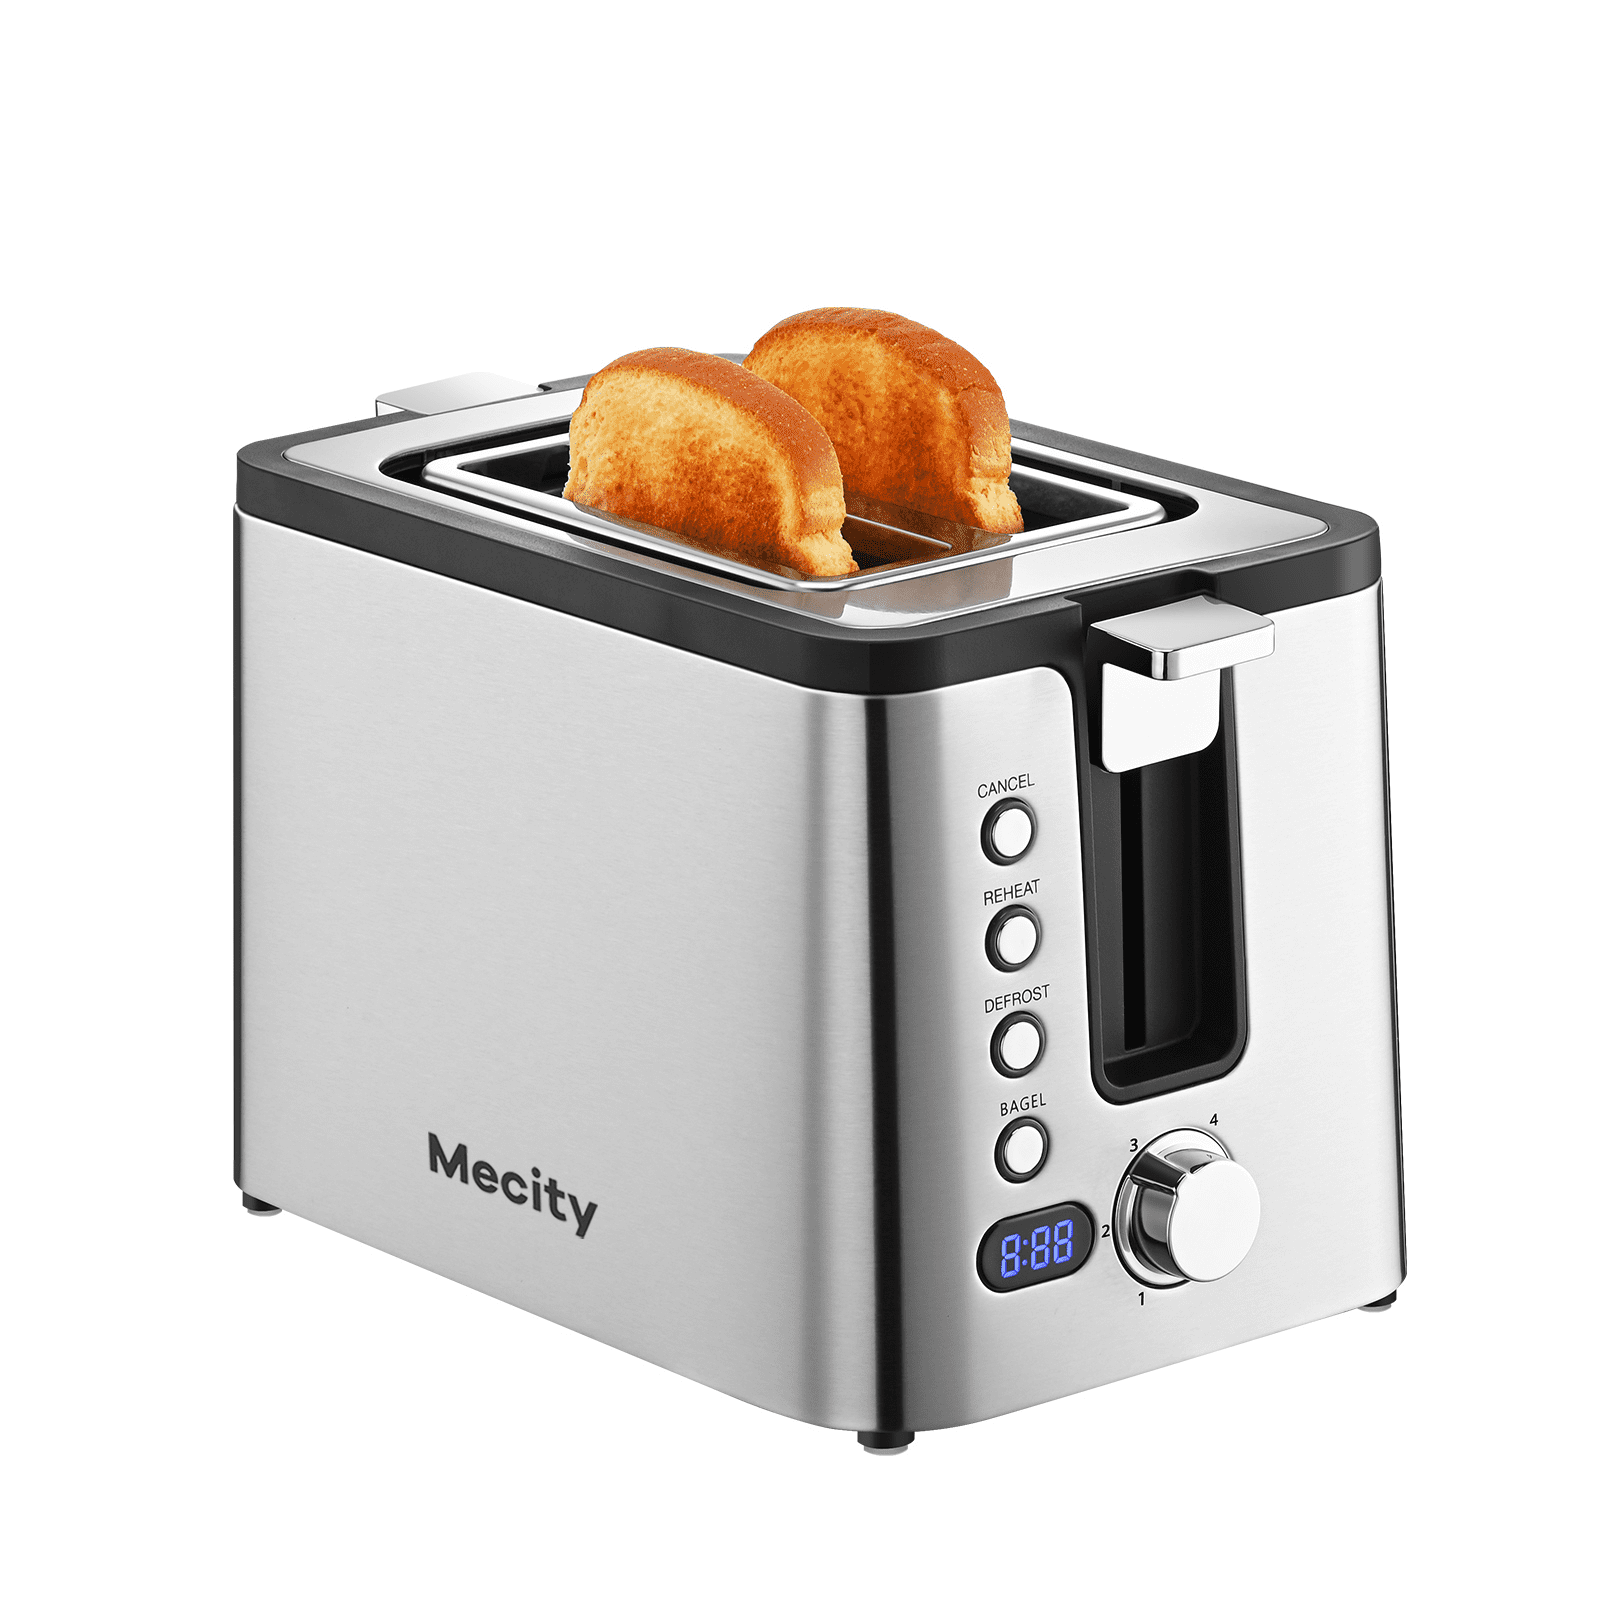 Prohibit Shelves In The . Toaster 4 Slice, Geek Chef Stainless Steel  Extra-Wide Slot Toaster With Dual Control Panels Of Bagel,Defrost,Cancel  Function,Ban  - CJdropshipping